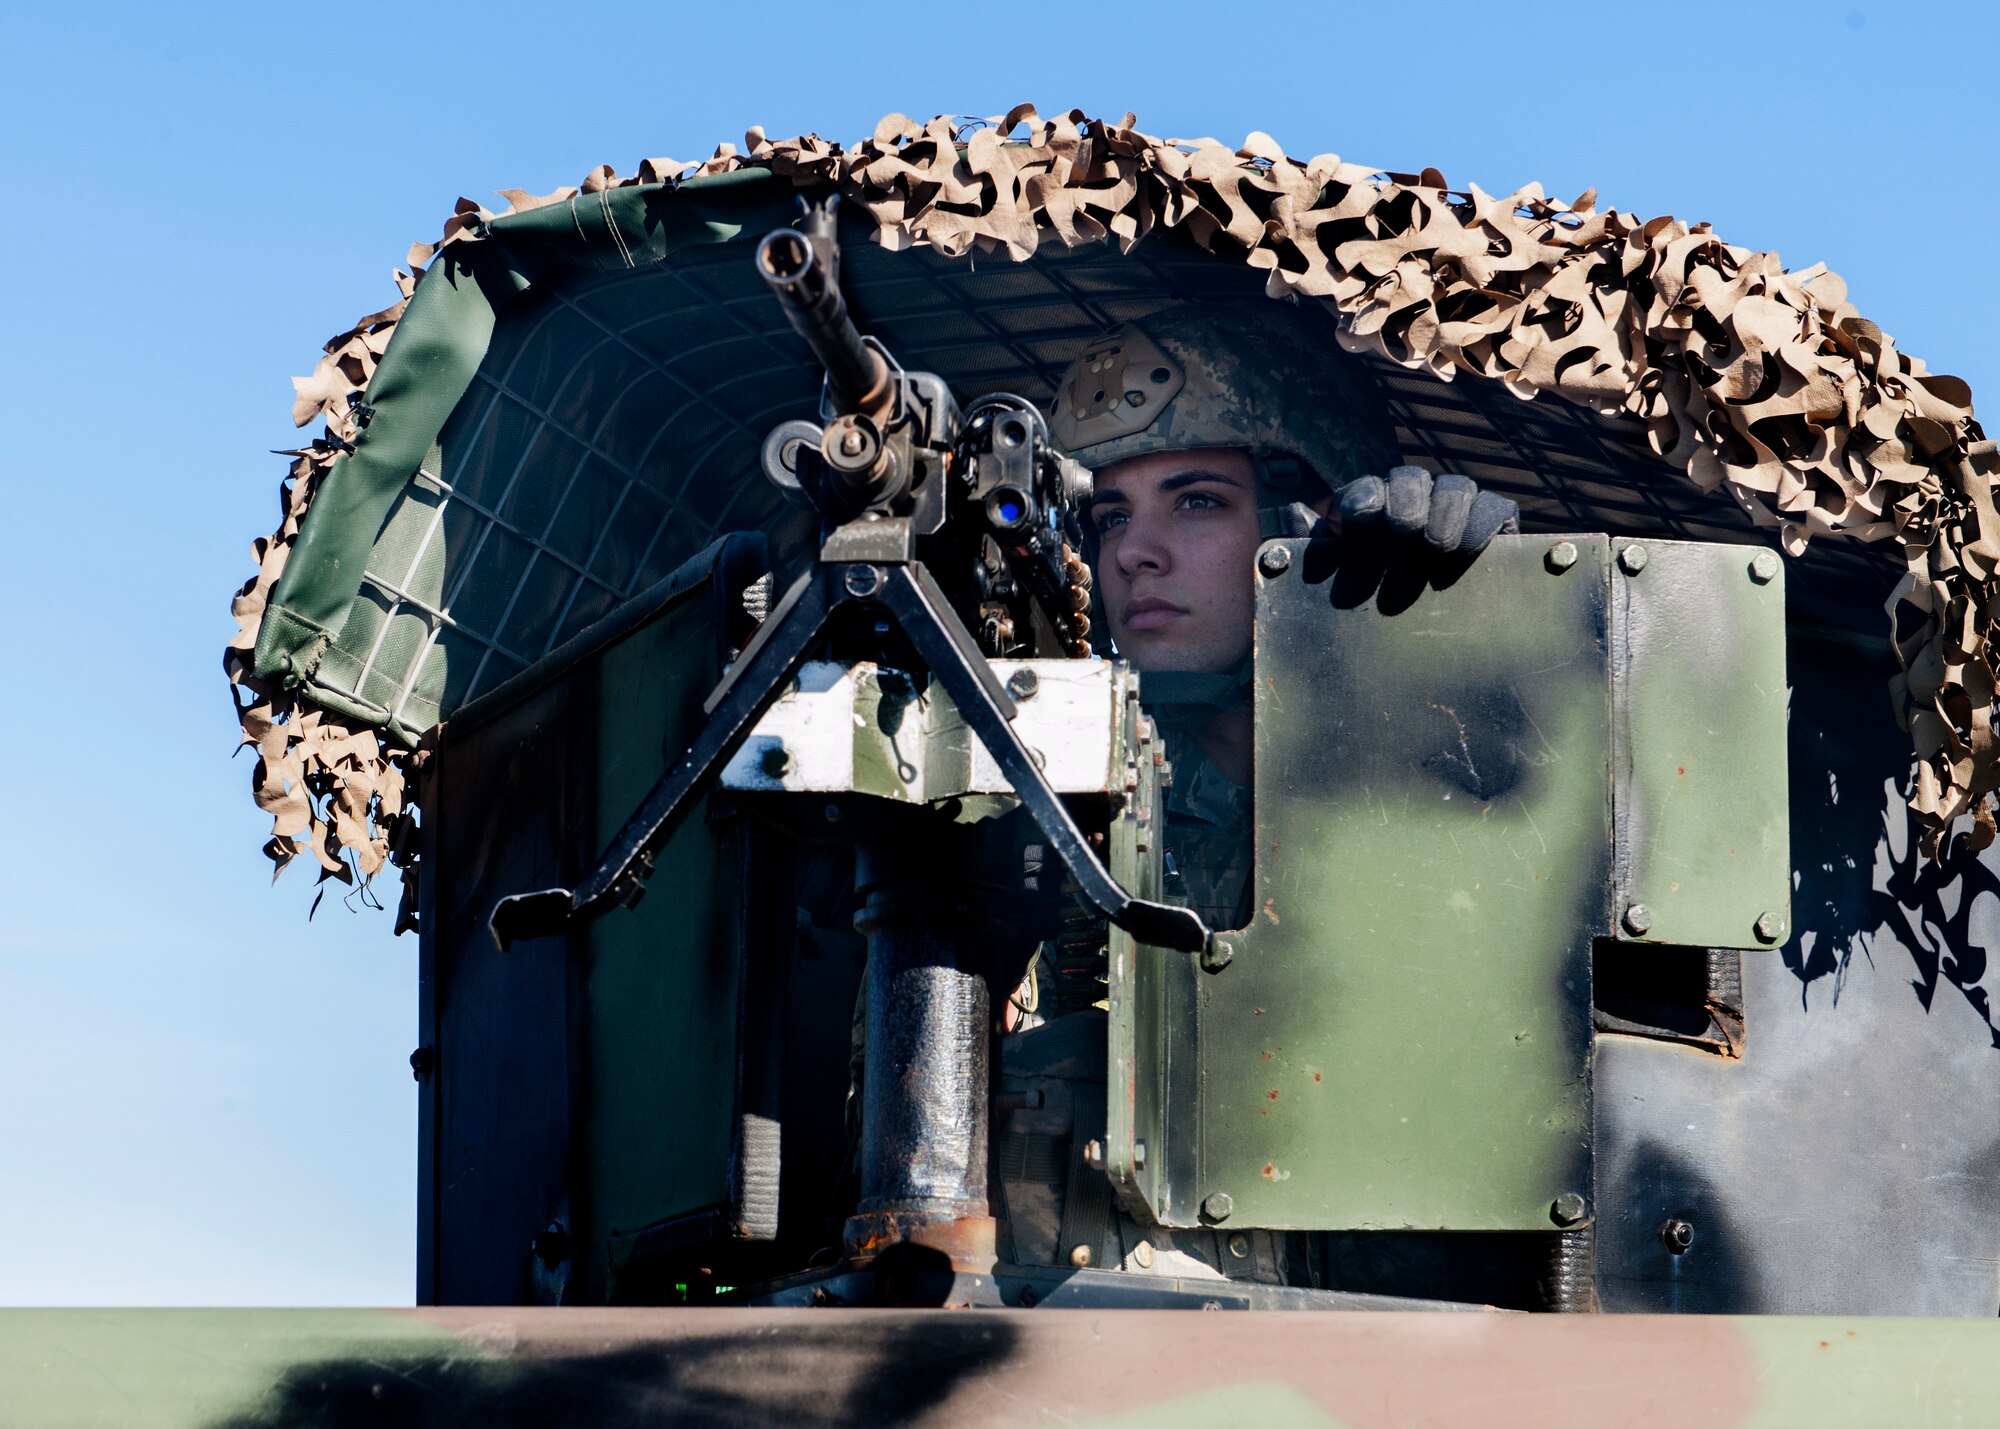 Airman 1st Class Miller Swanson, 39th Security Forces Squadron monitoring facility operator, provides security during a wing exercise Jan. 15, 2016, at Incirlik Air Base, Turkey. Swanson’s job was to ensure the area was secure while fellow defenders practiced body searching techniques on simulated opposing forces. (U.S. Air Force photo by Senior Airman Krystal Ardrey/Released)